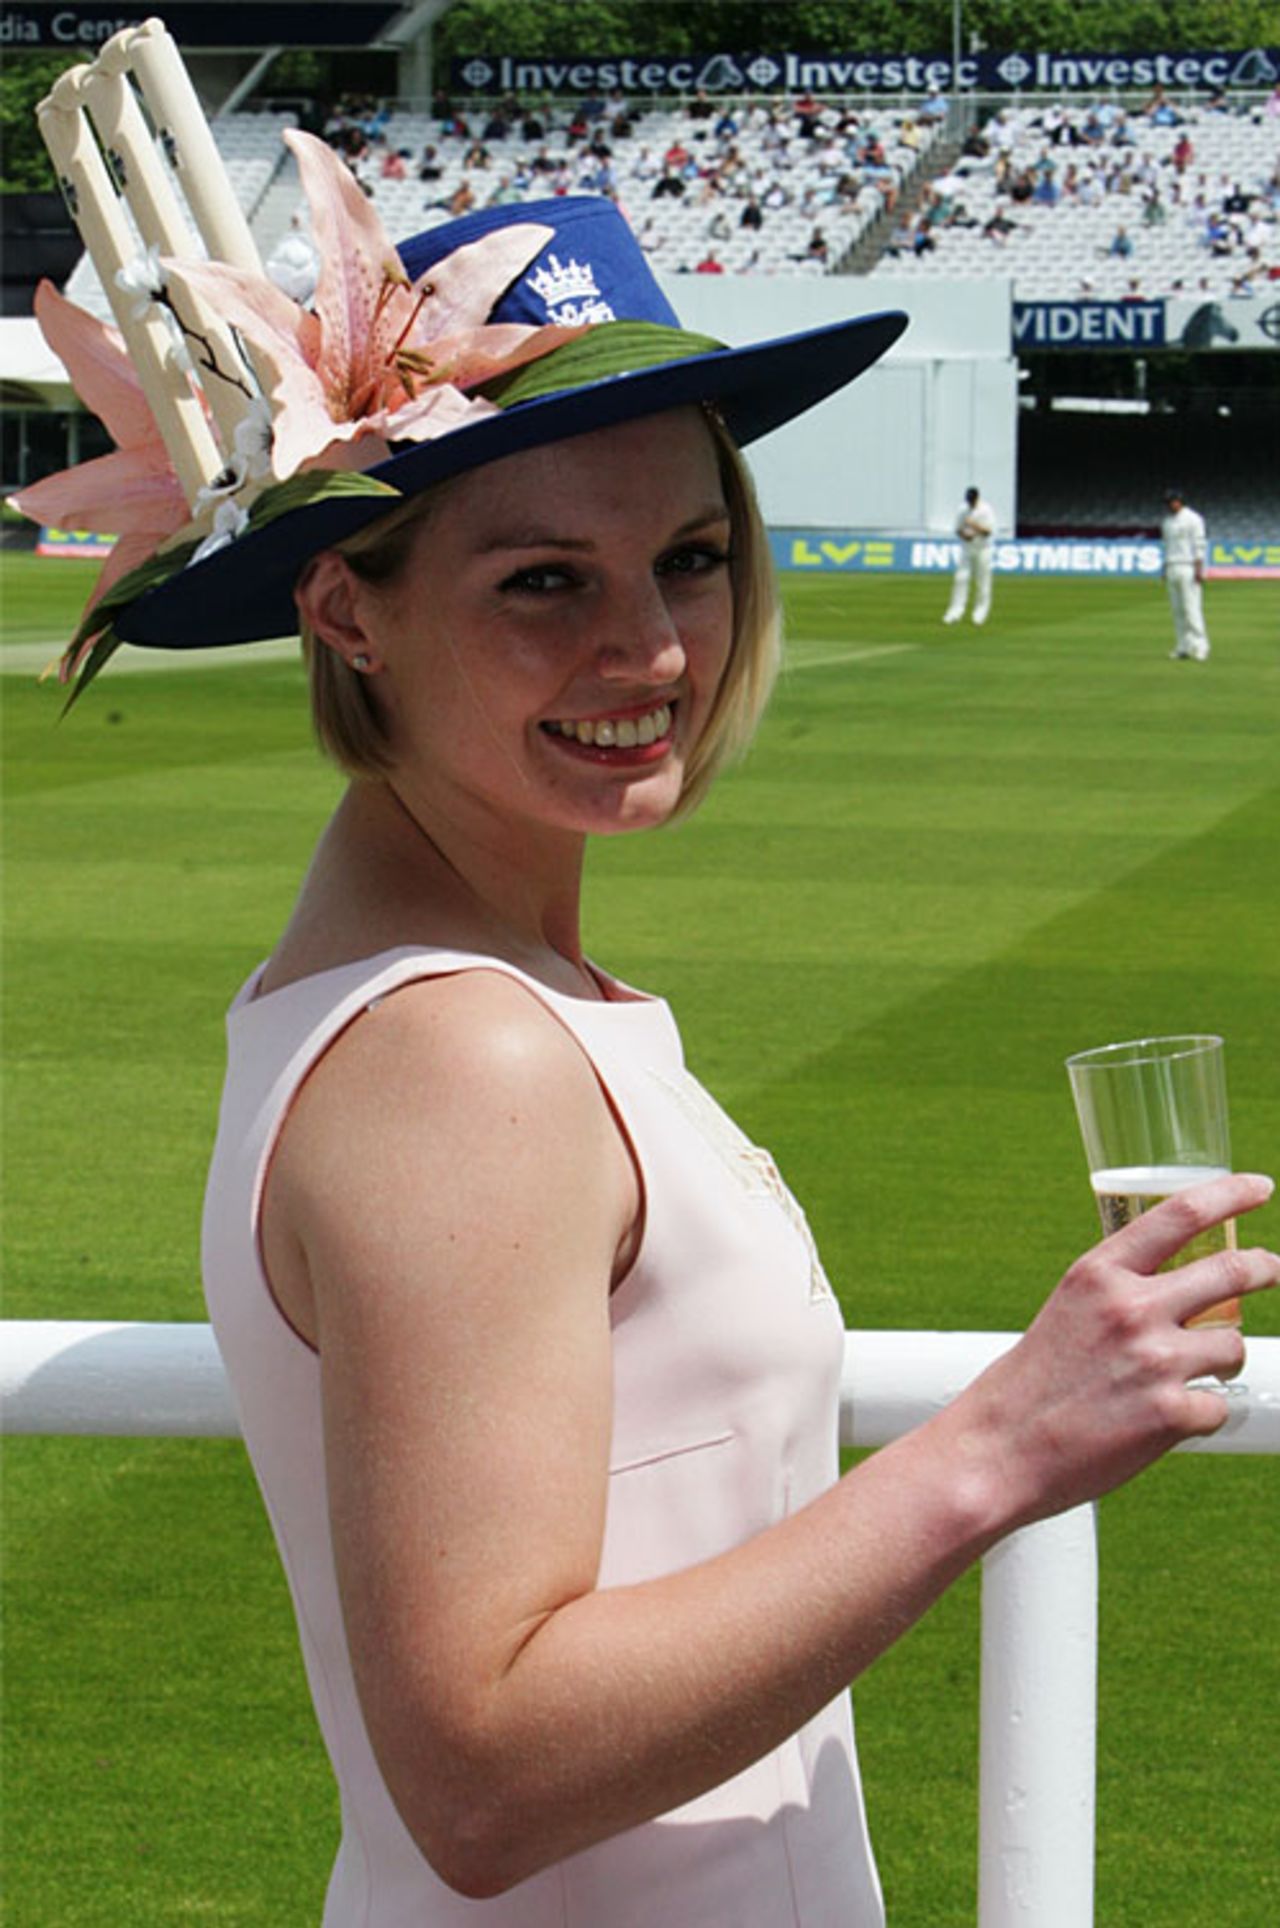 Getting into the spirit: spectator Kate Roberts takes the first Lord's Ladies' Day very seriously, Middlesex v Essex, Lord's, June 7, 2008